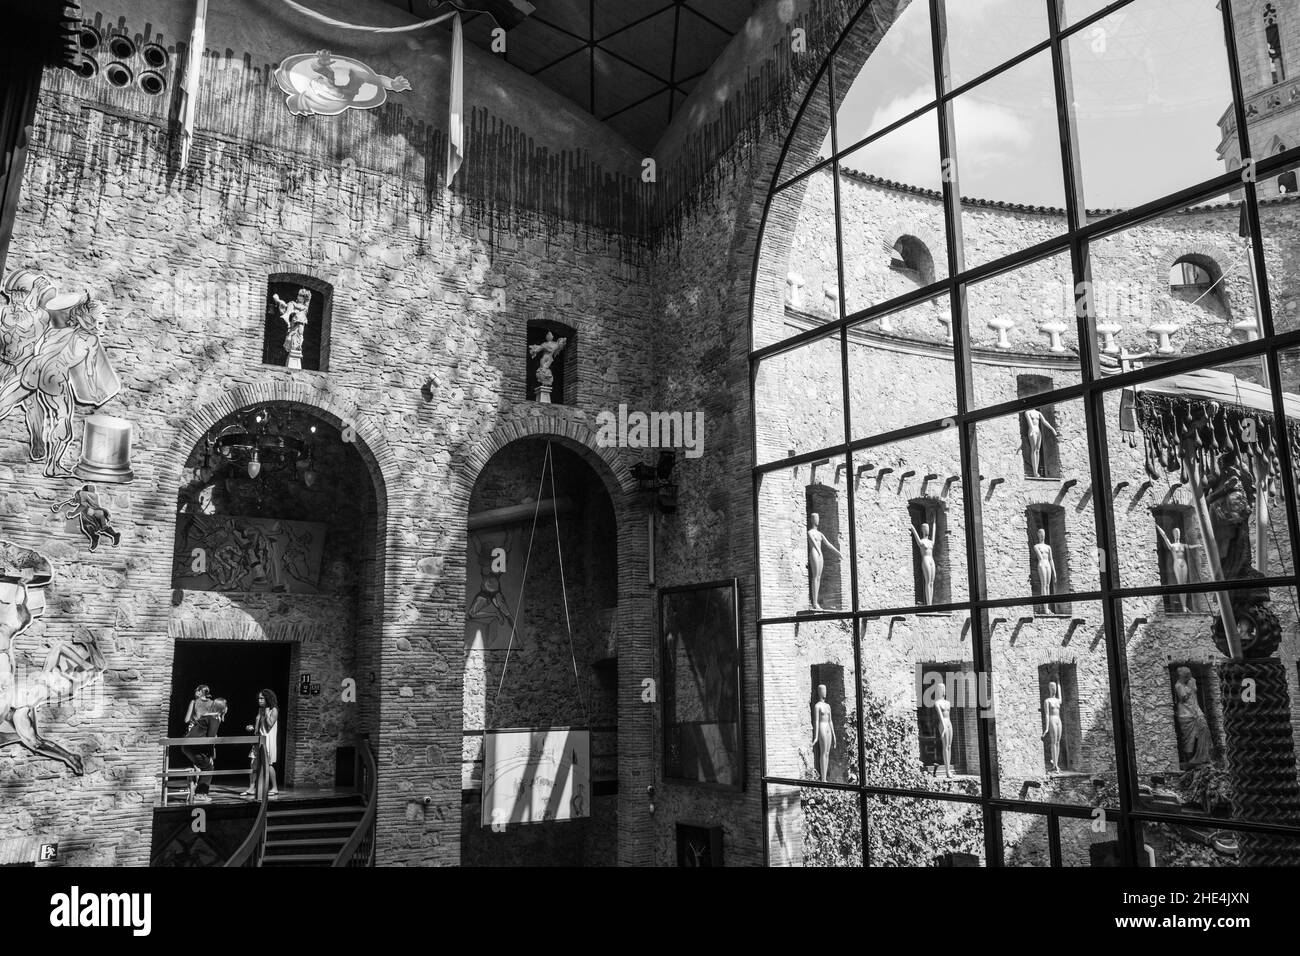 Grayscale of panoramic windows in Dali museum with figures inside walls in Figueras, Spain Stock Photo